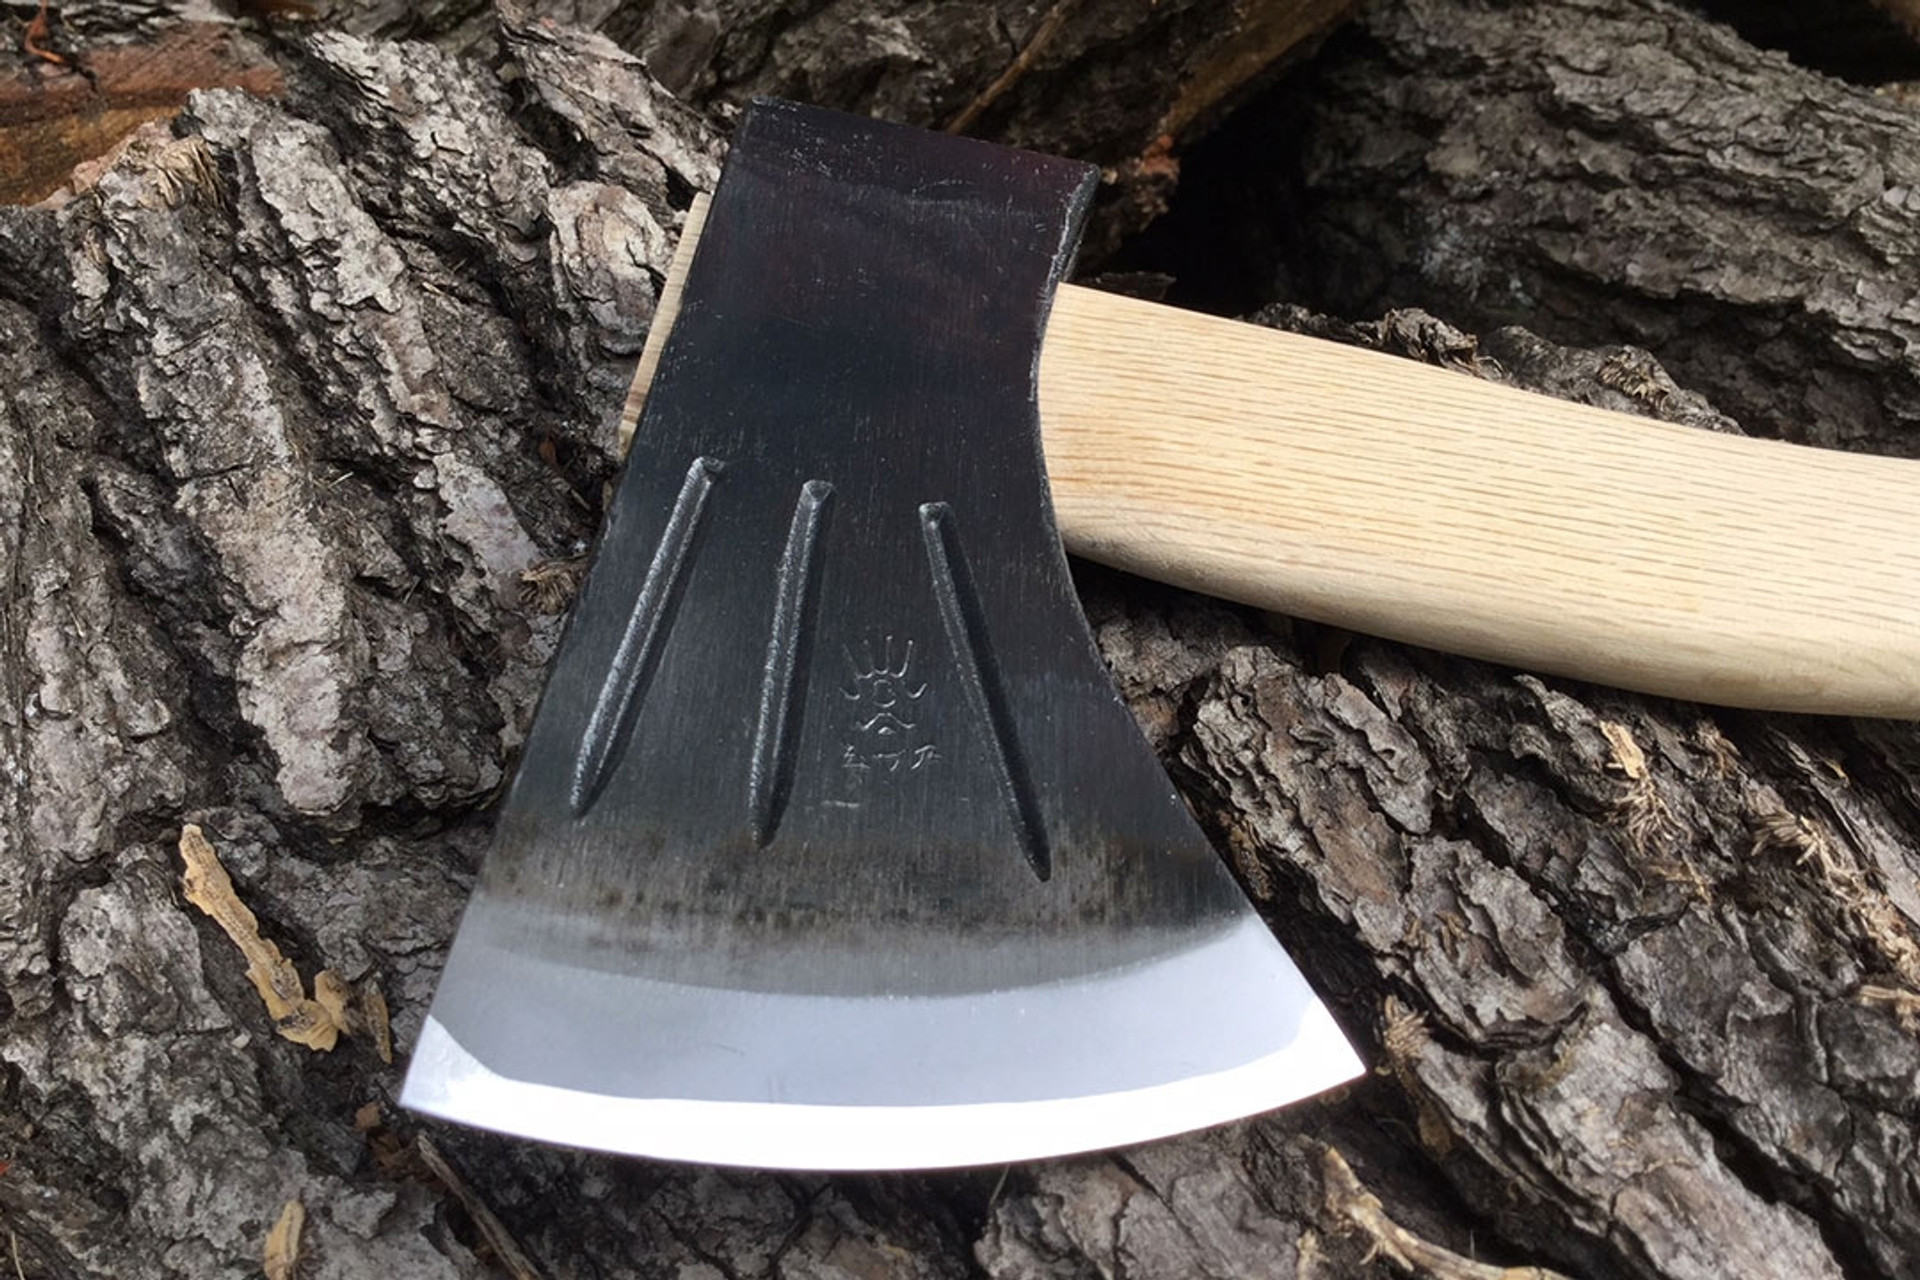 Japanese Hatchet. Available from Workshop Heaven